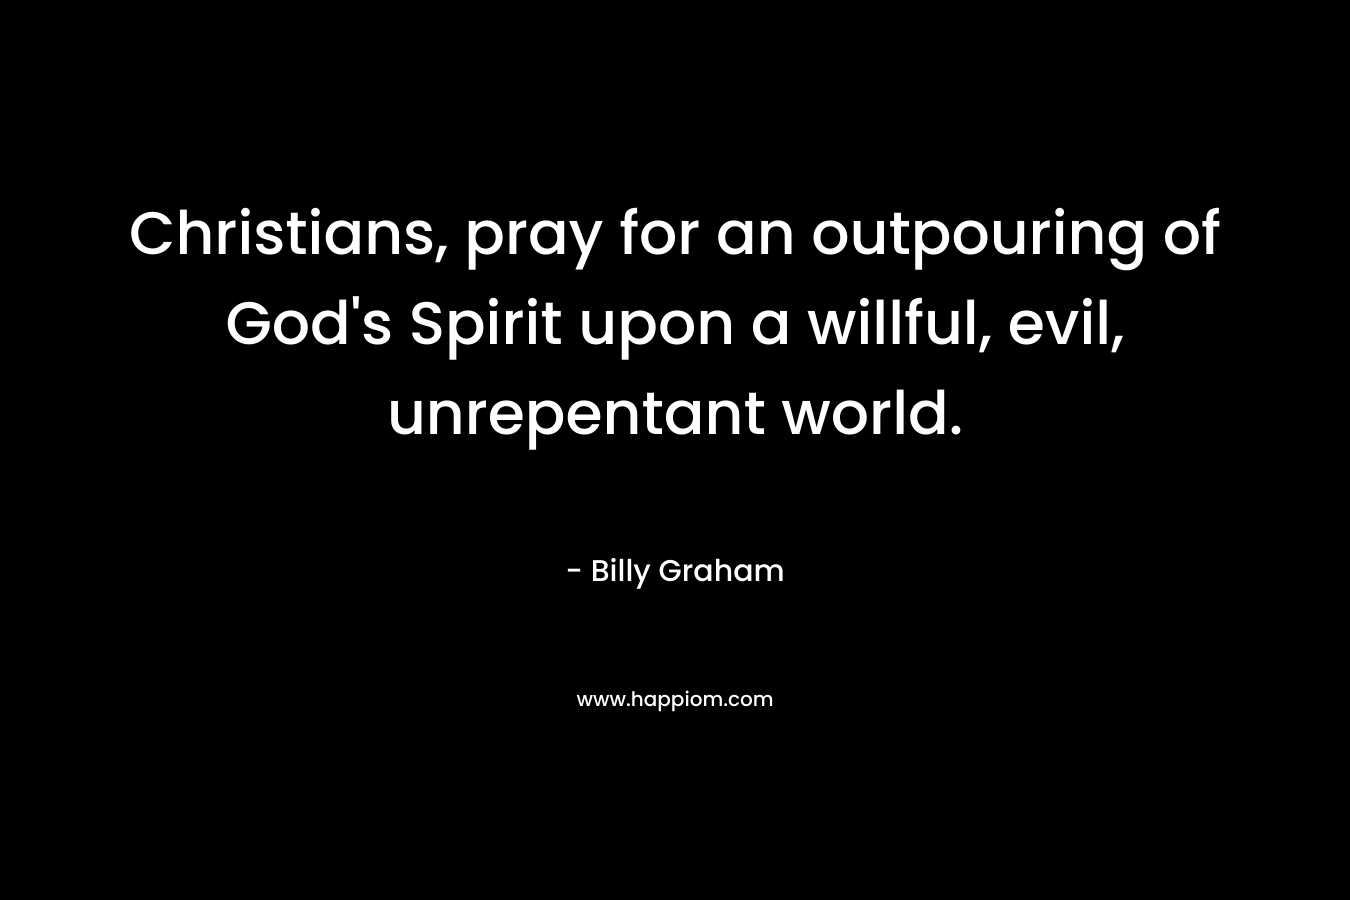 Christians, pray for an outpouring of God's Spirit upon a willful, evil, unrepentant world.